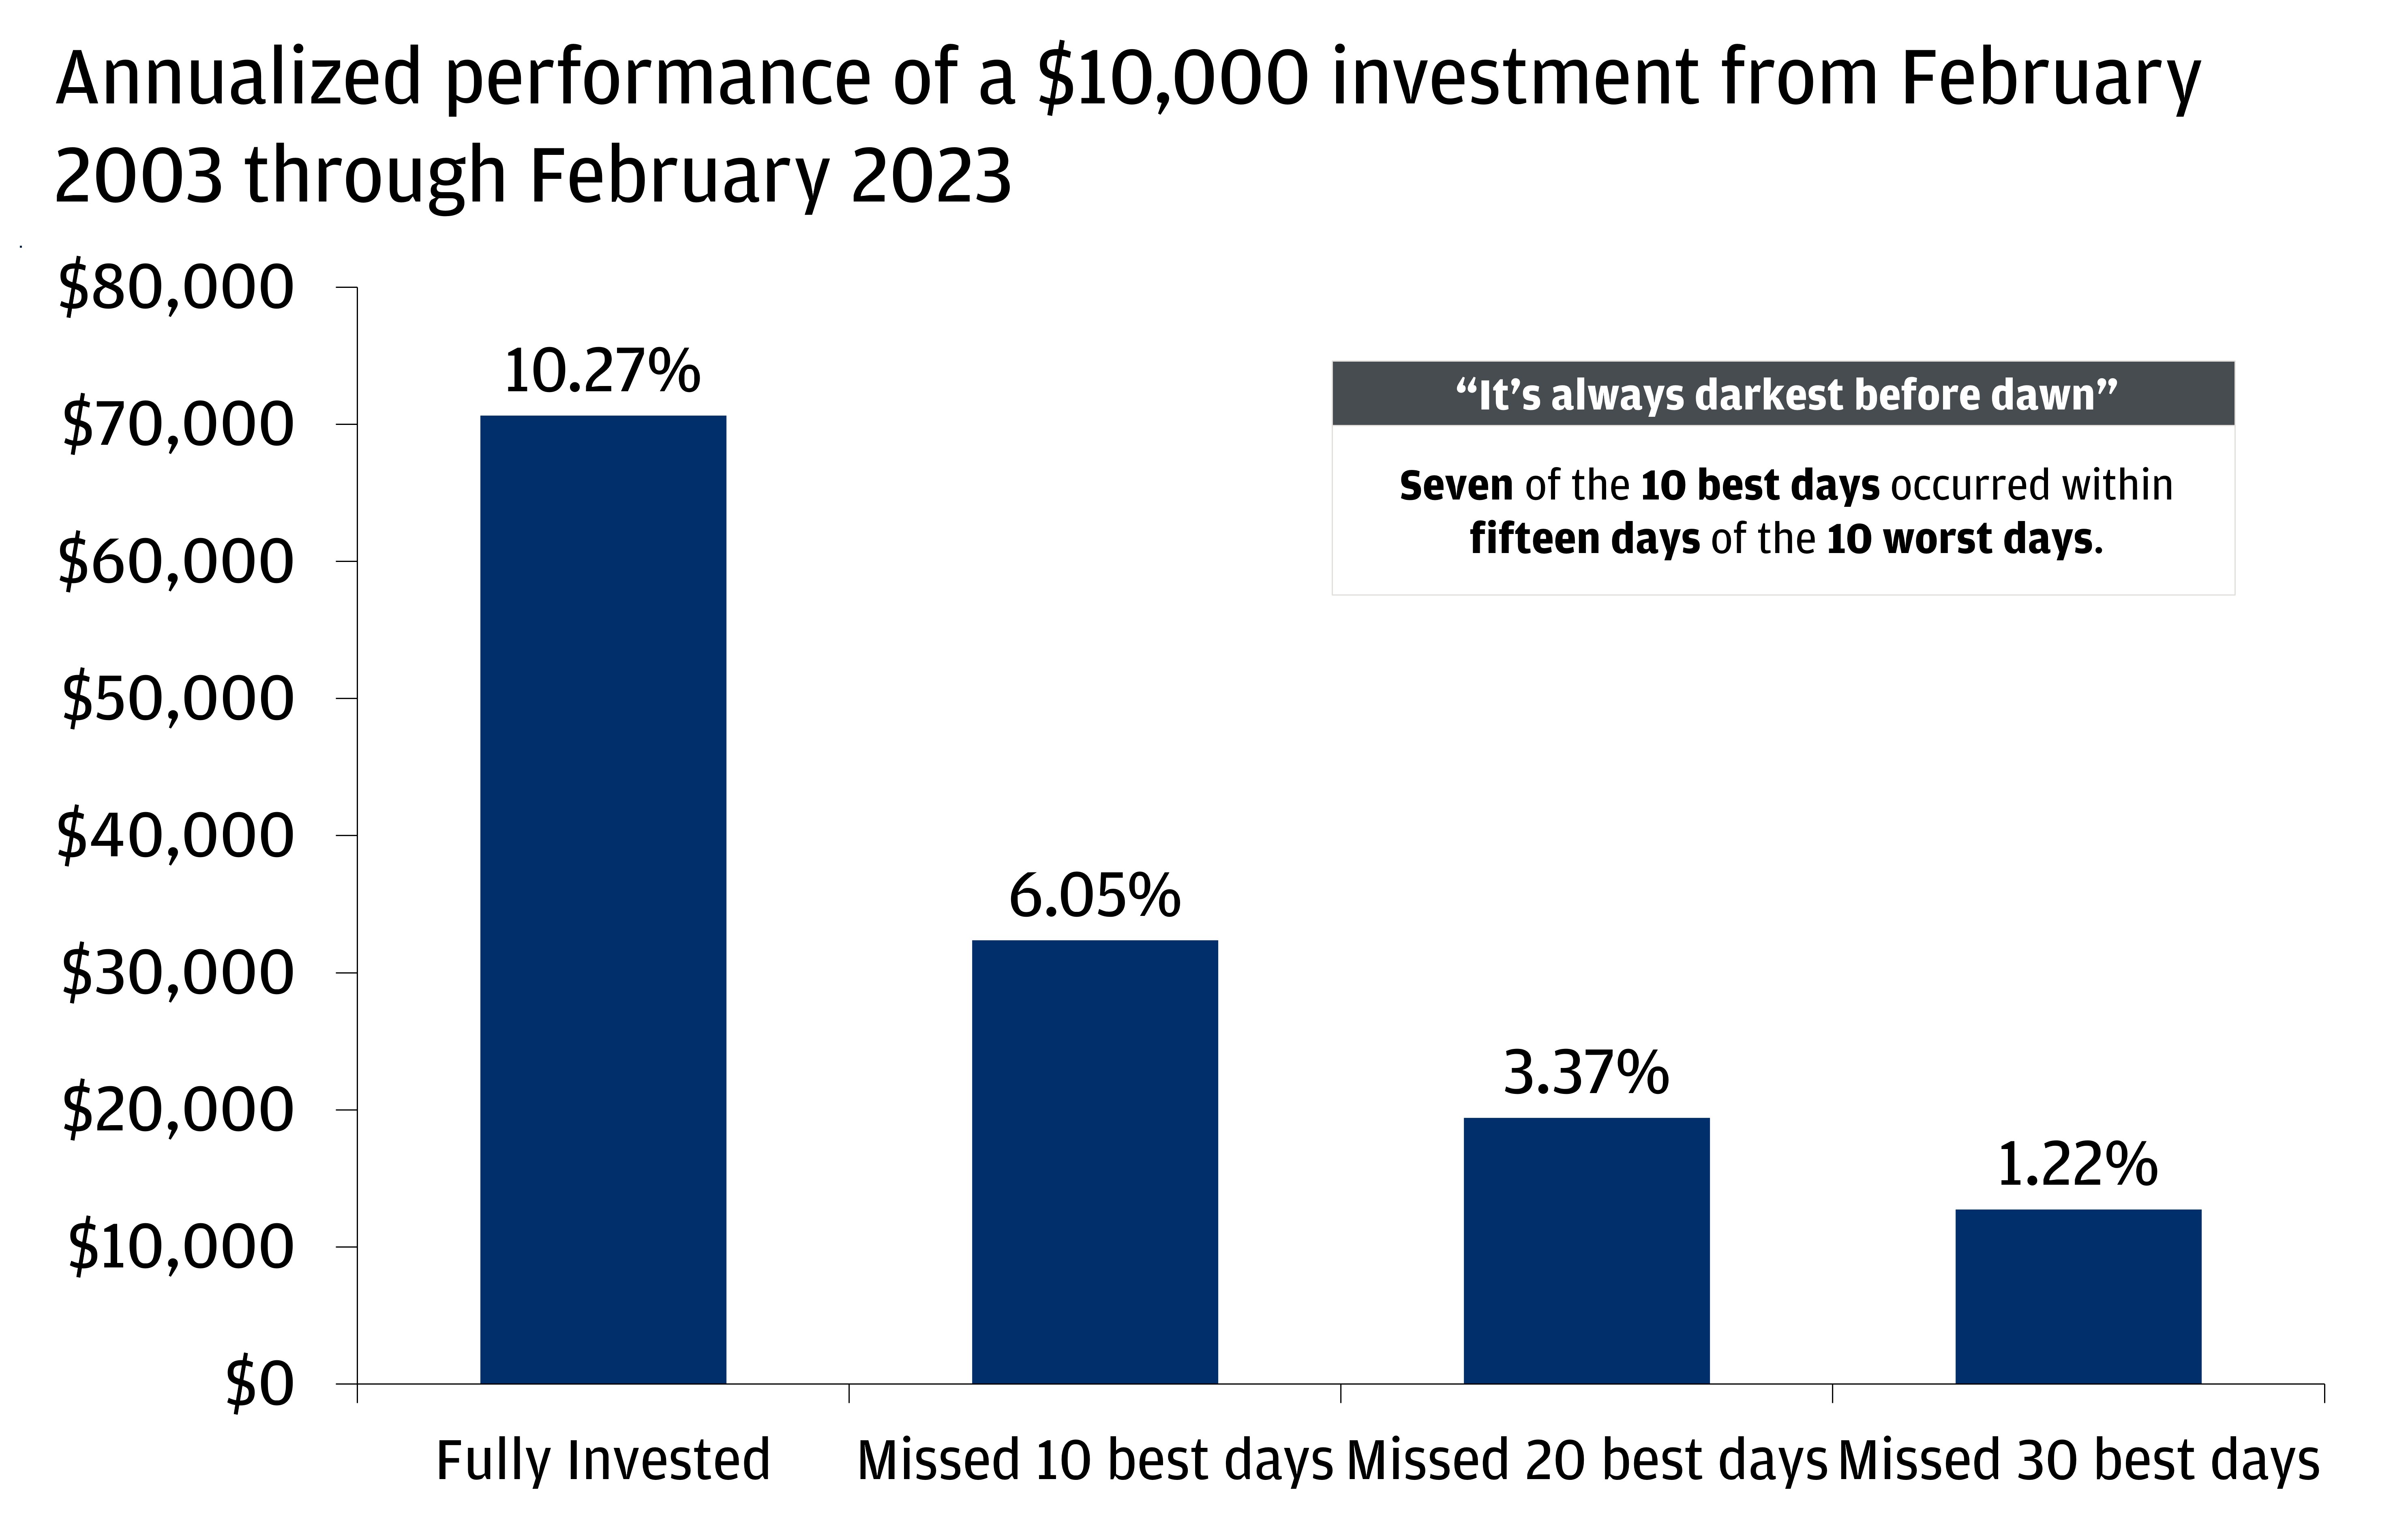 The chart describes the annualized performance of a $10,000 investment from February 2003 through February 2023.